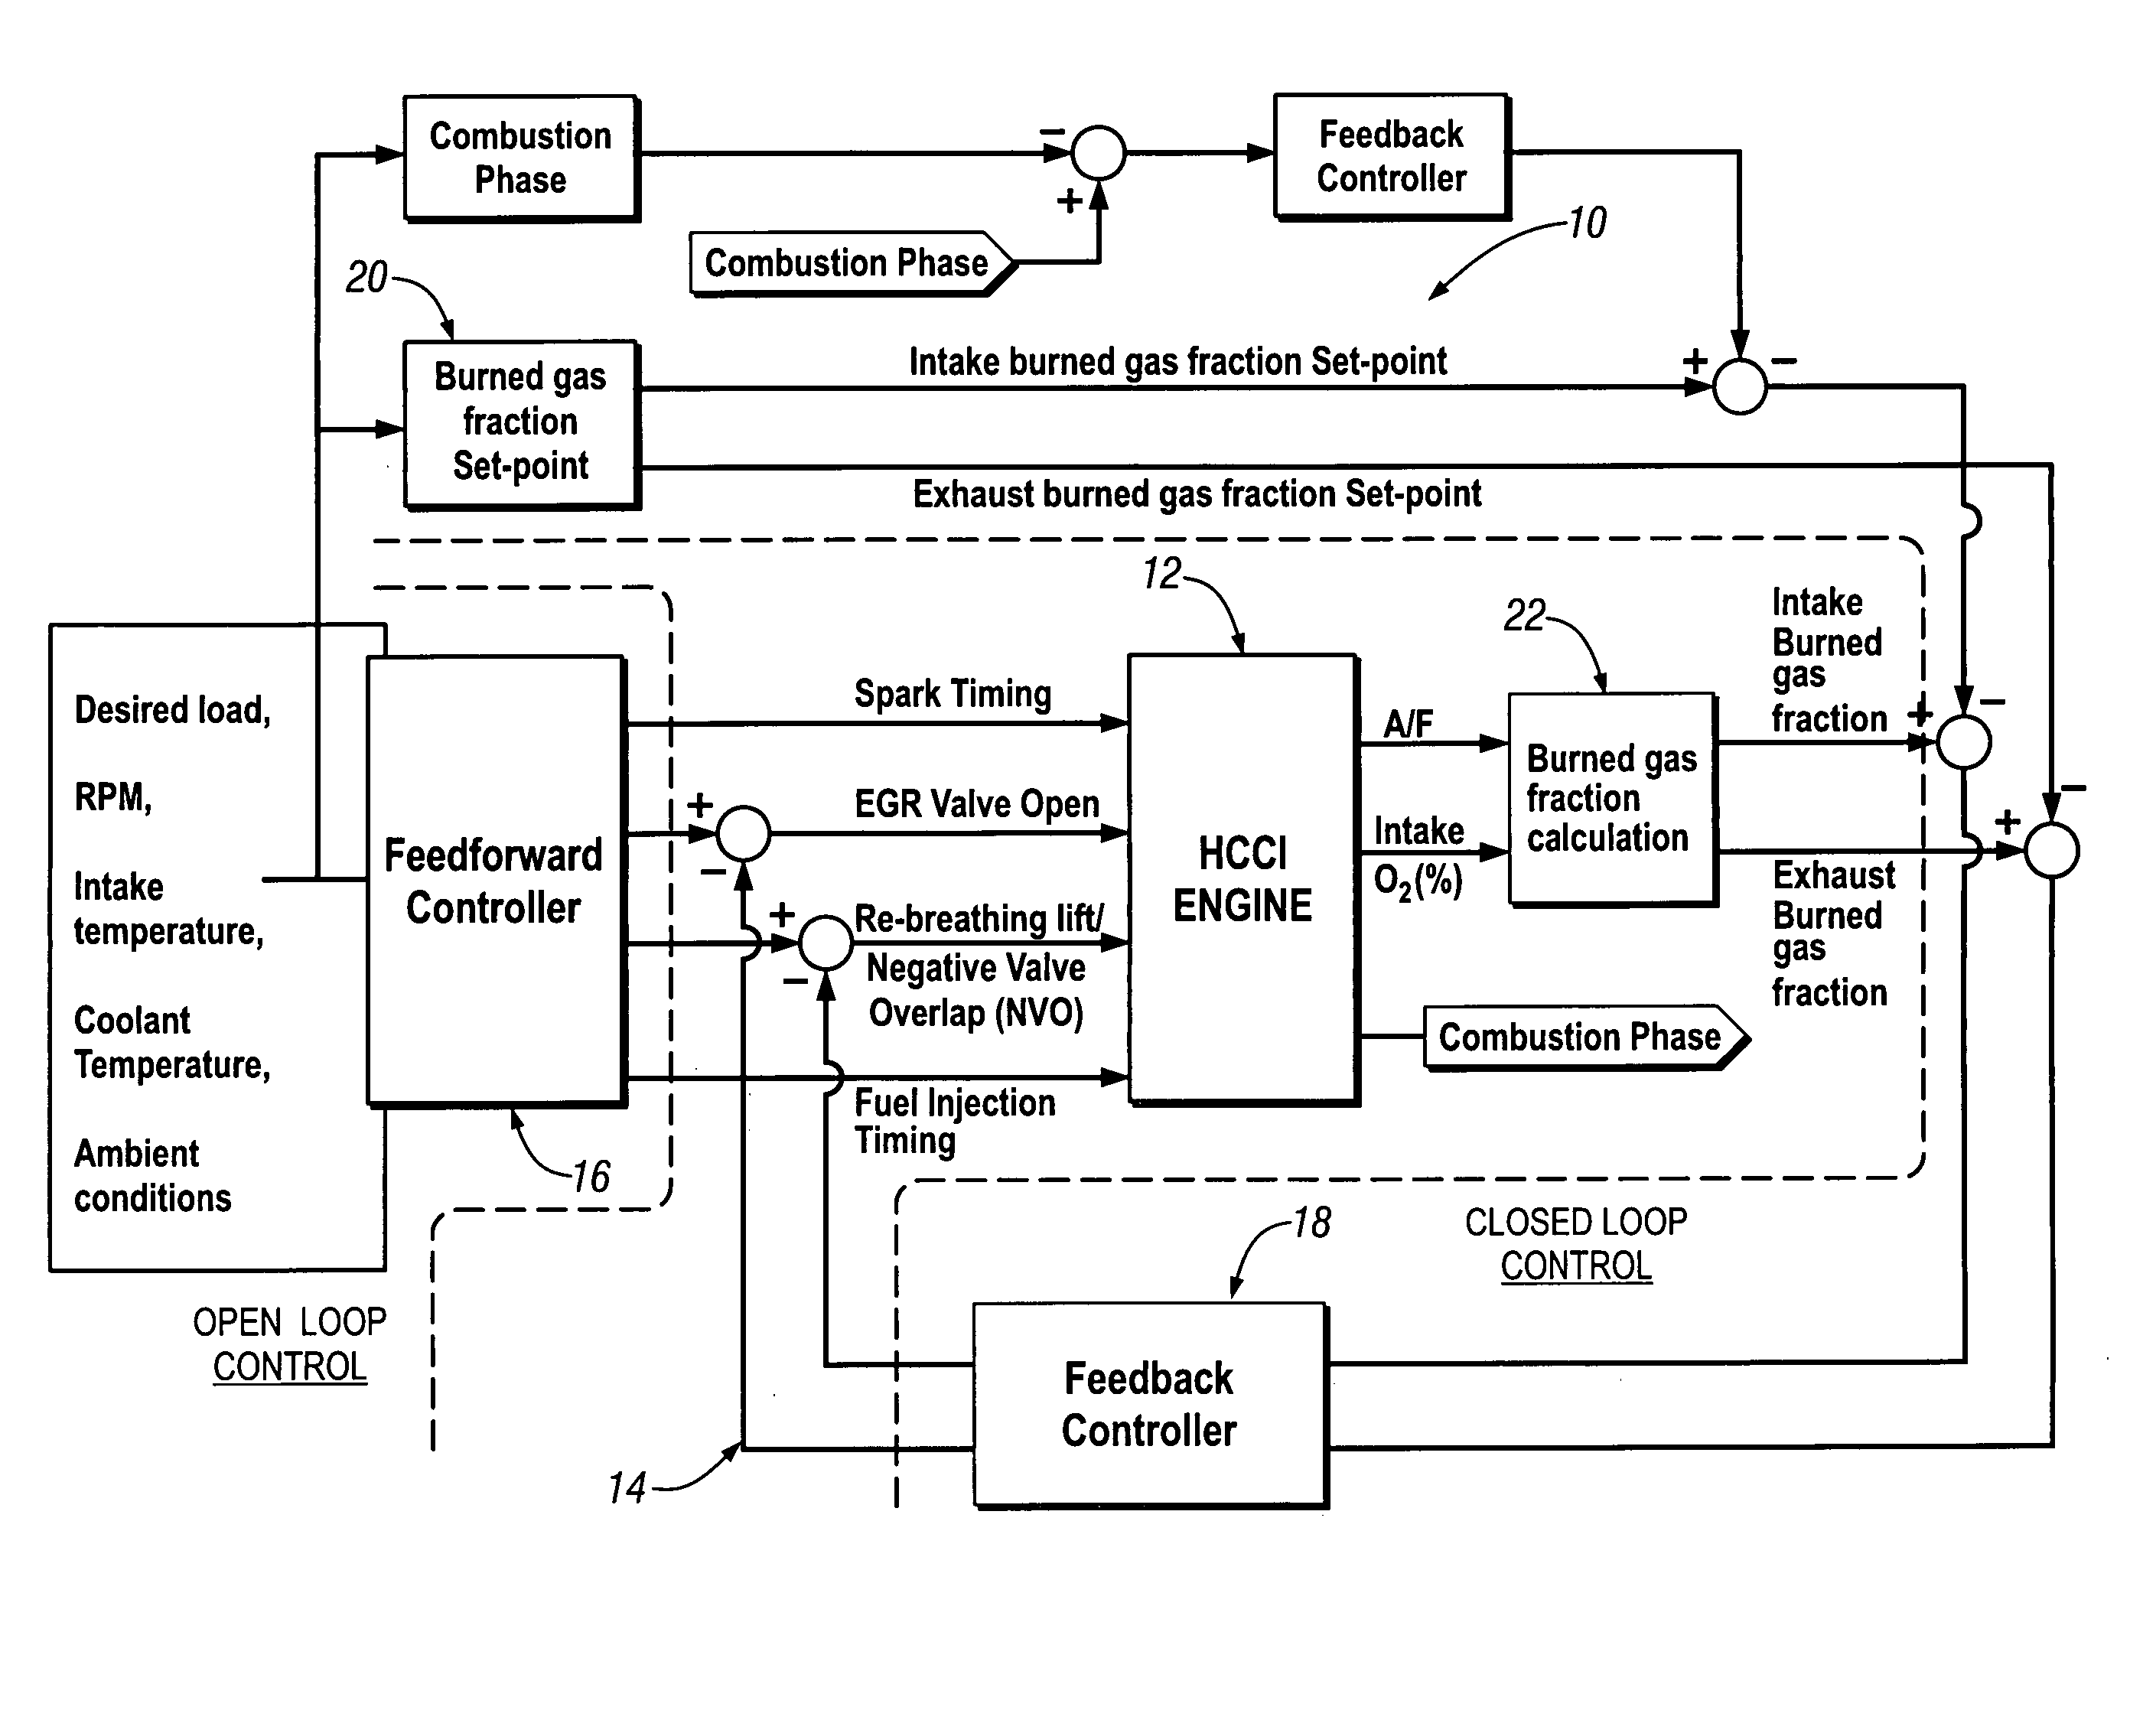 HCCI engine combustion control